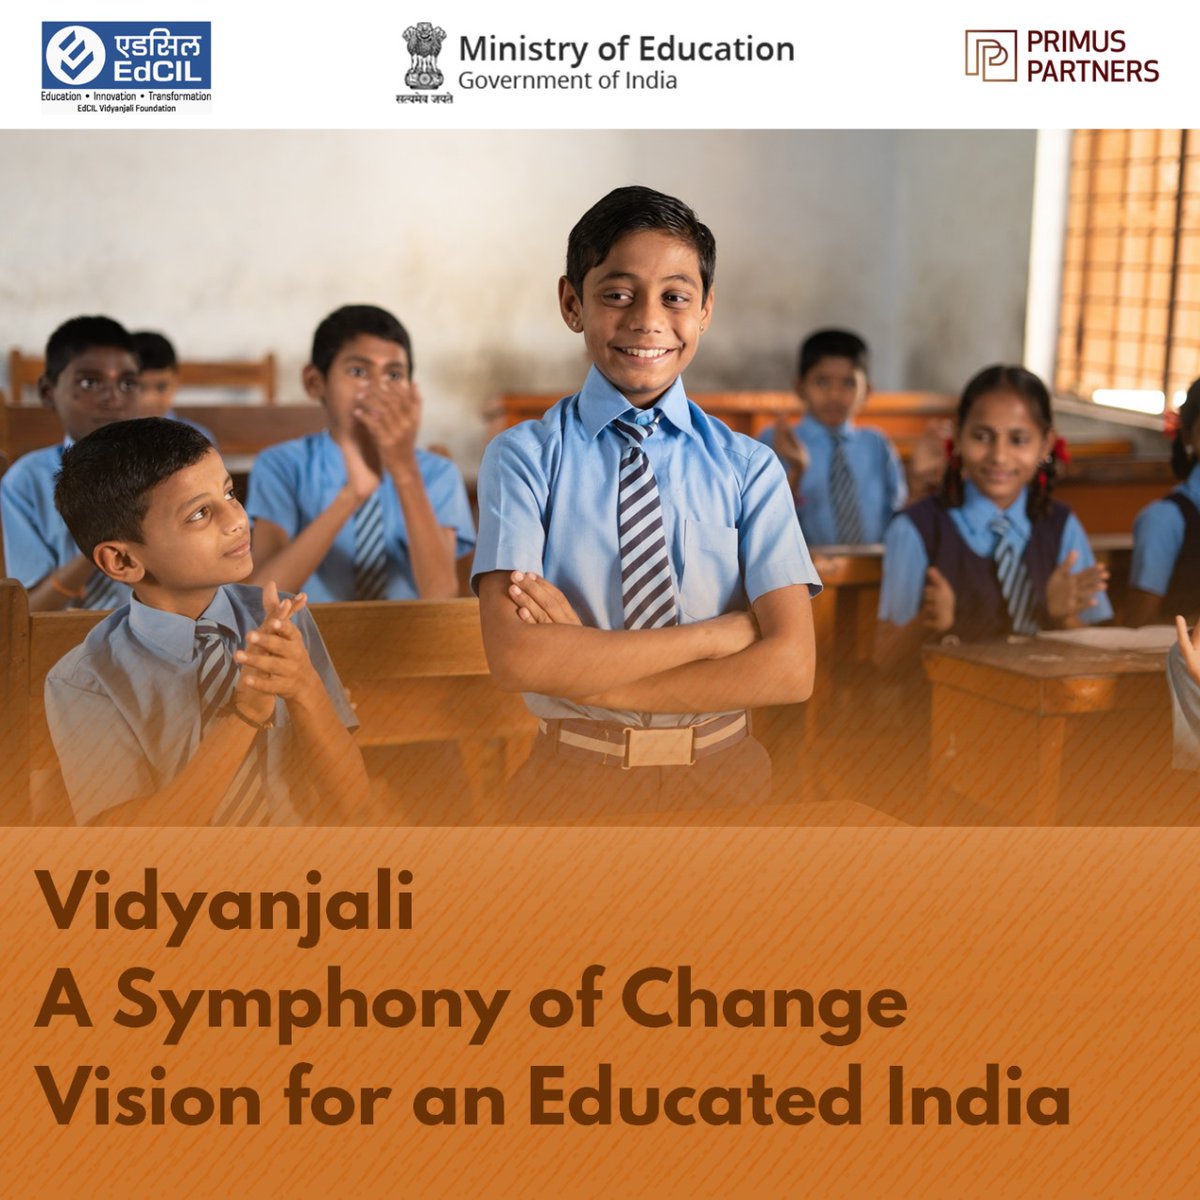 Experience the Symphony of Change with Vidyanjali. Our vision: an educated India, where every child's potential shines bright @BharatForgeLtd @ClearmediH @FiatIndia @HDFC_Bank @gatesfoundation